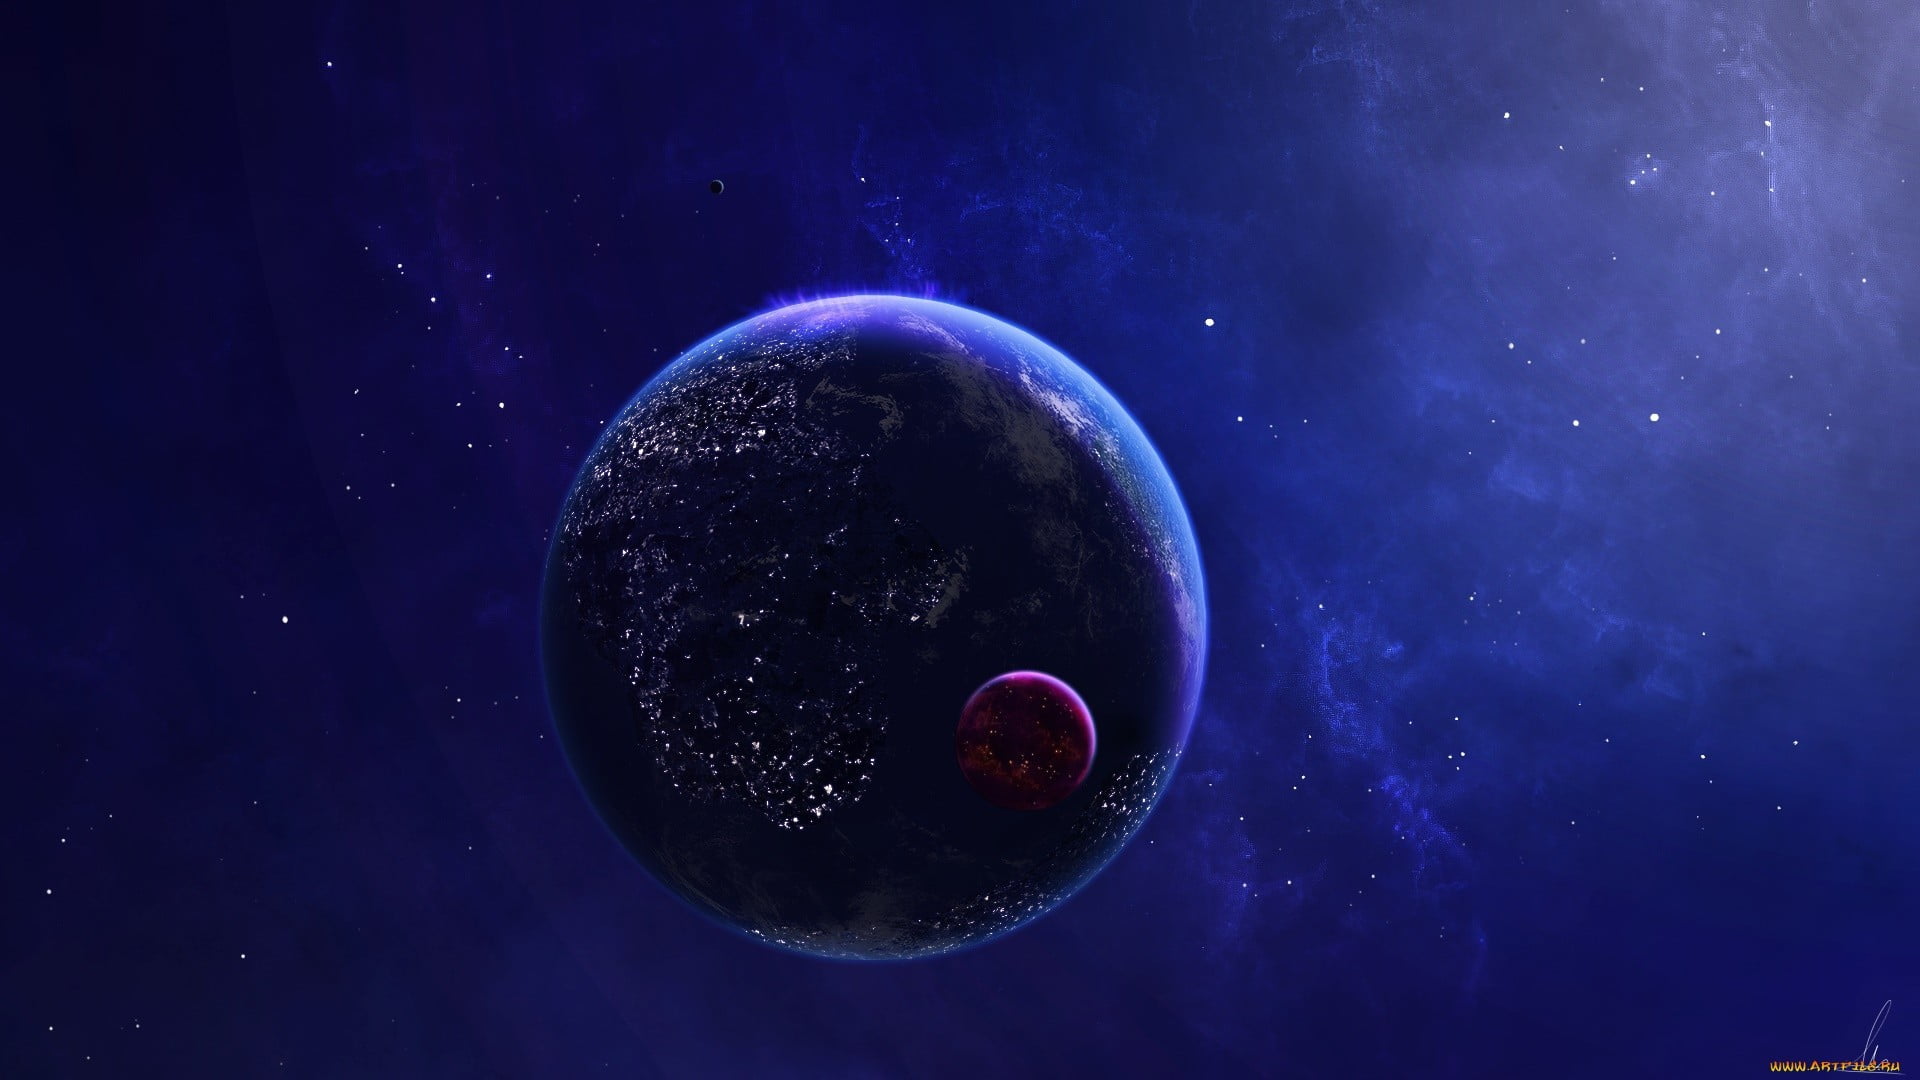 blue, black, and maroon planets wallpaper, space, planet